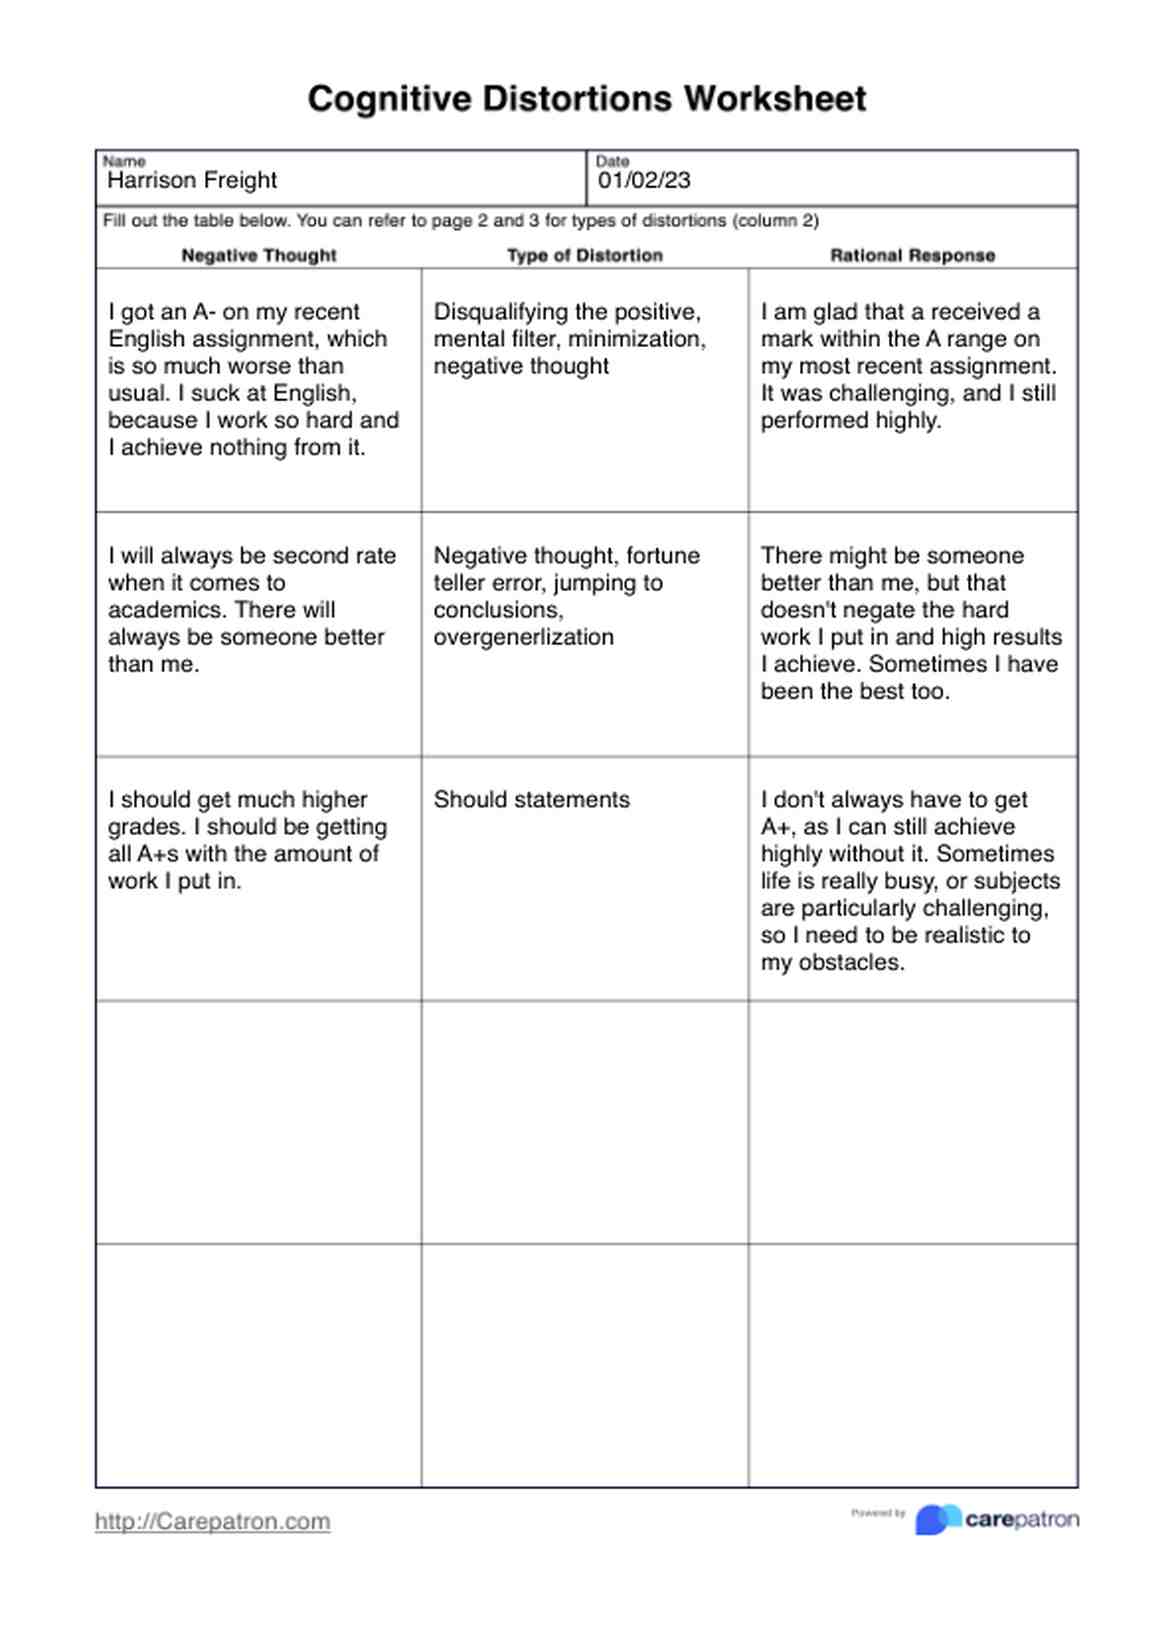 Cognitive Distortions Worksheets PDF Example